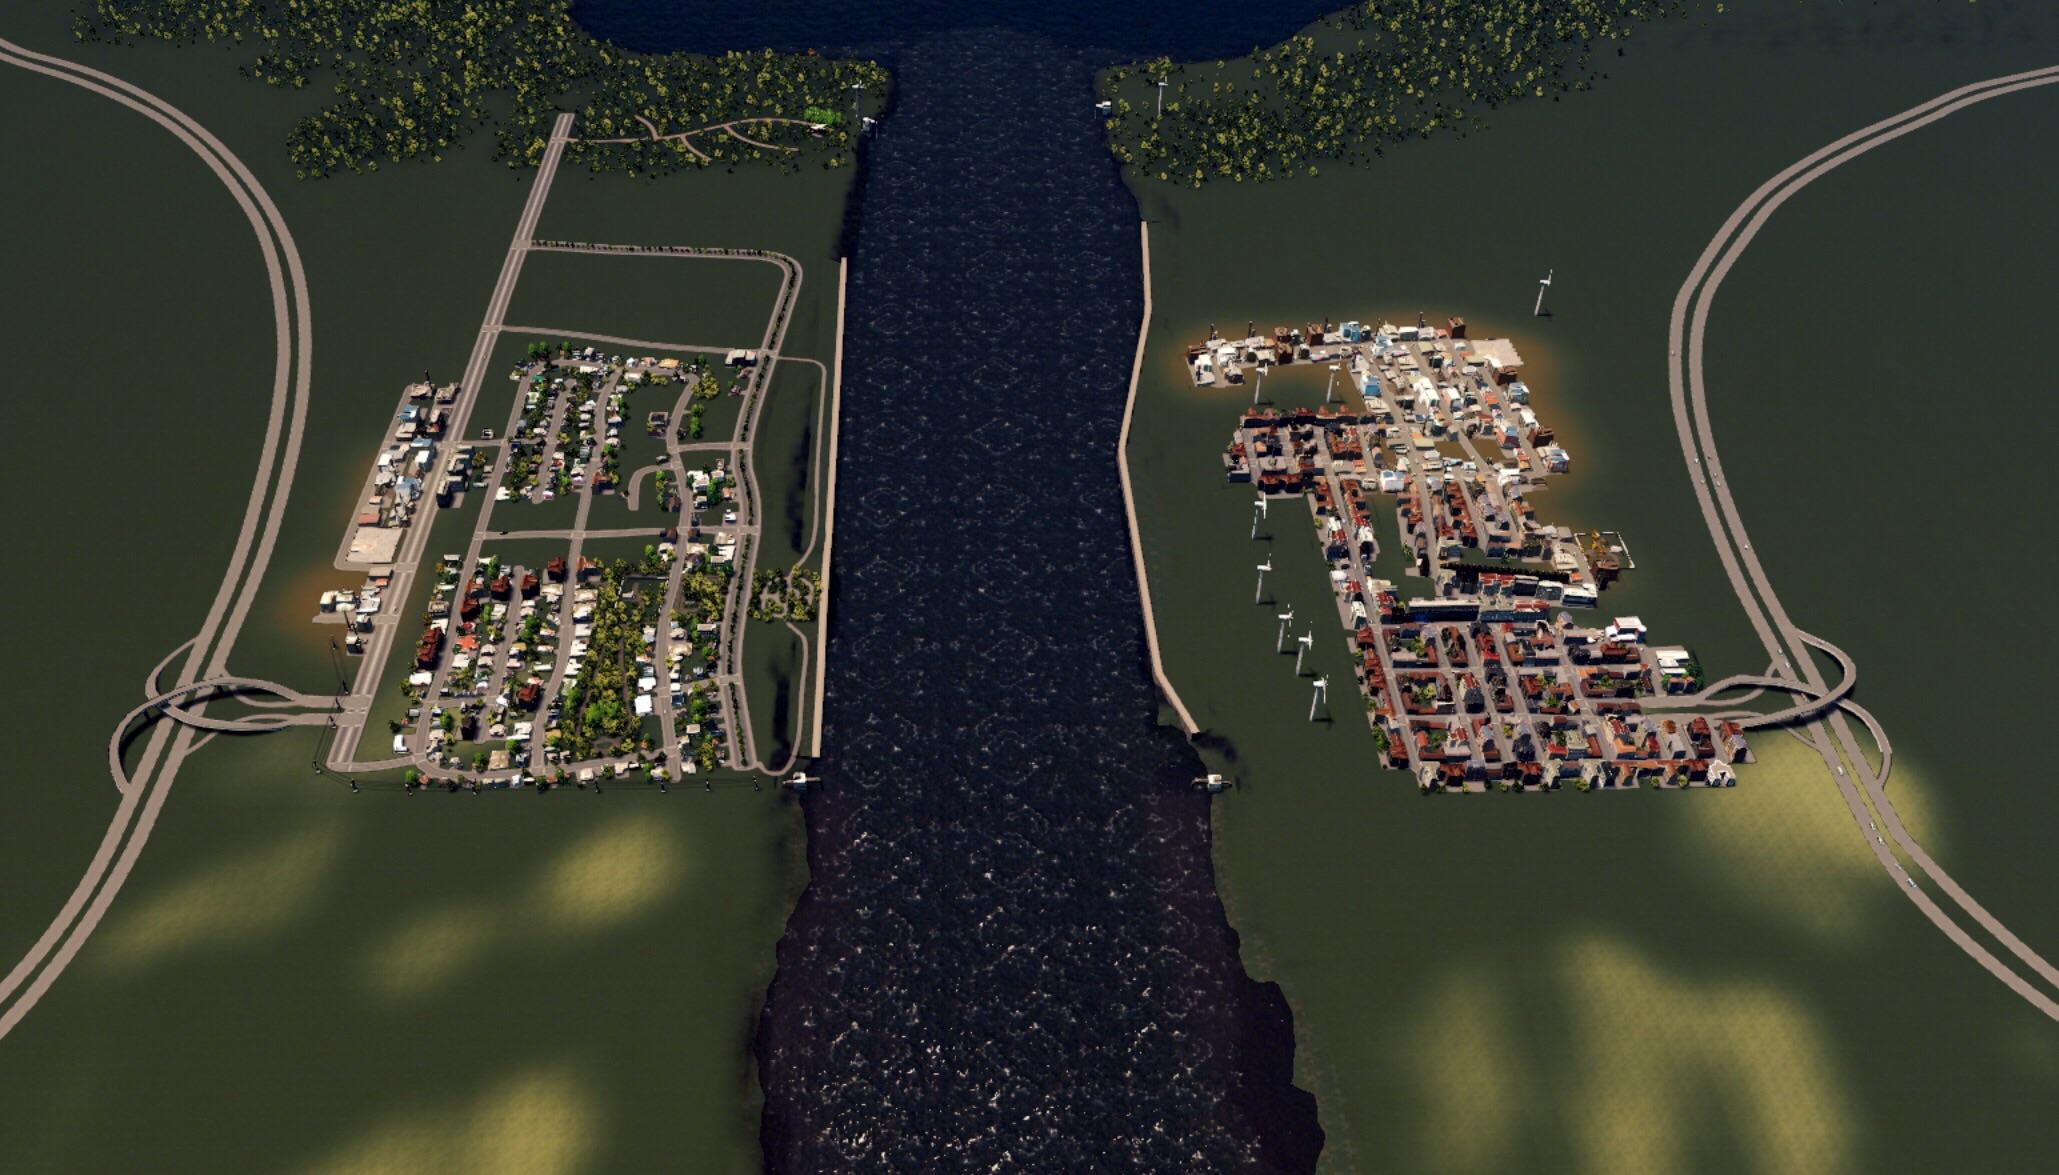 Father And Son Bond Over Excellent Cities: Skylines Project